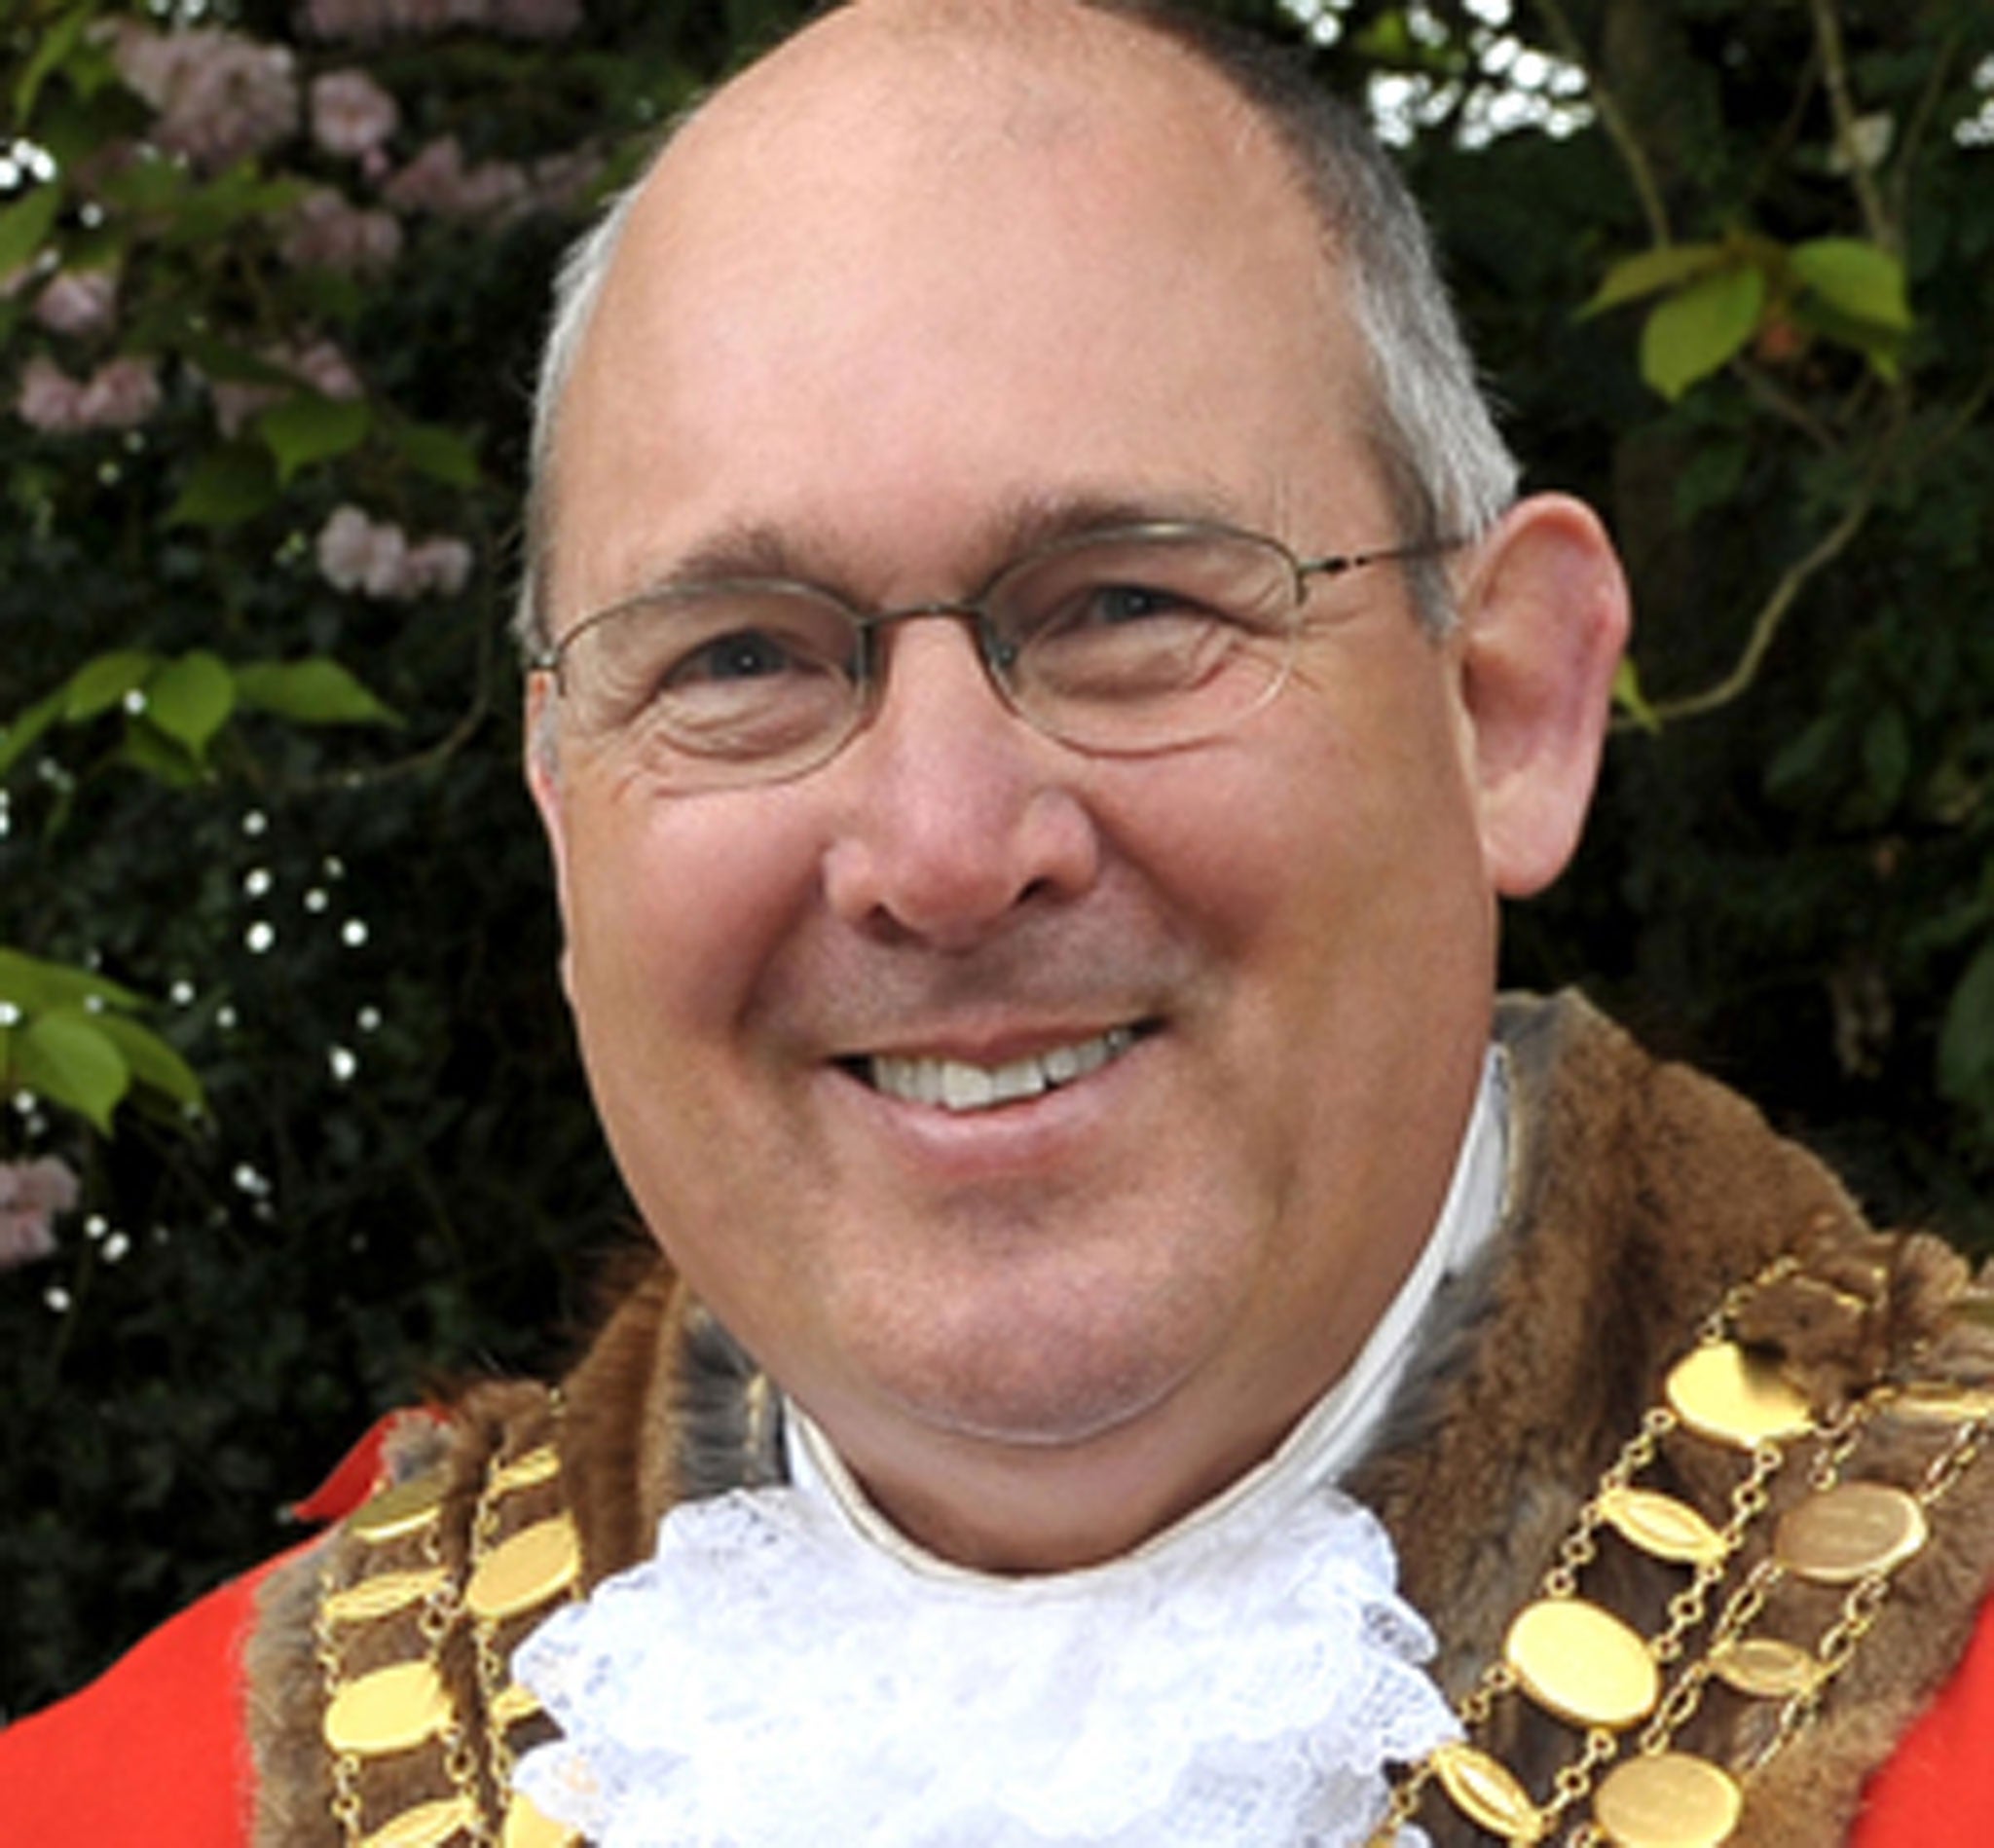 Mayor of Swindon Nick Martin was forced to apologise over comments about disabled people